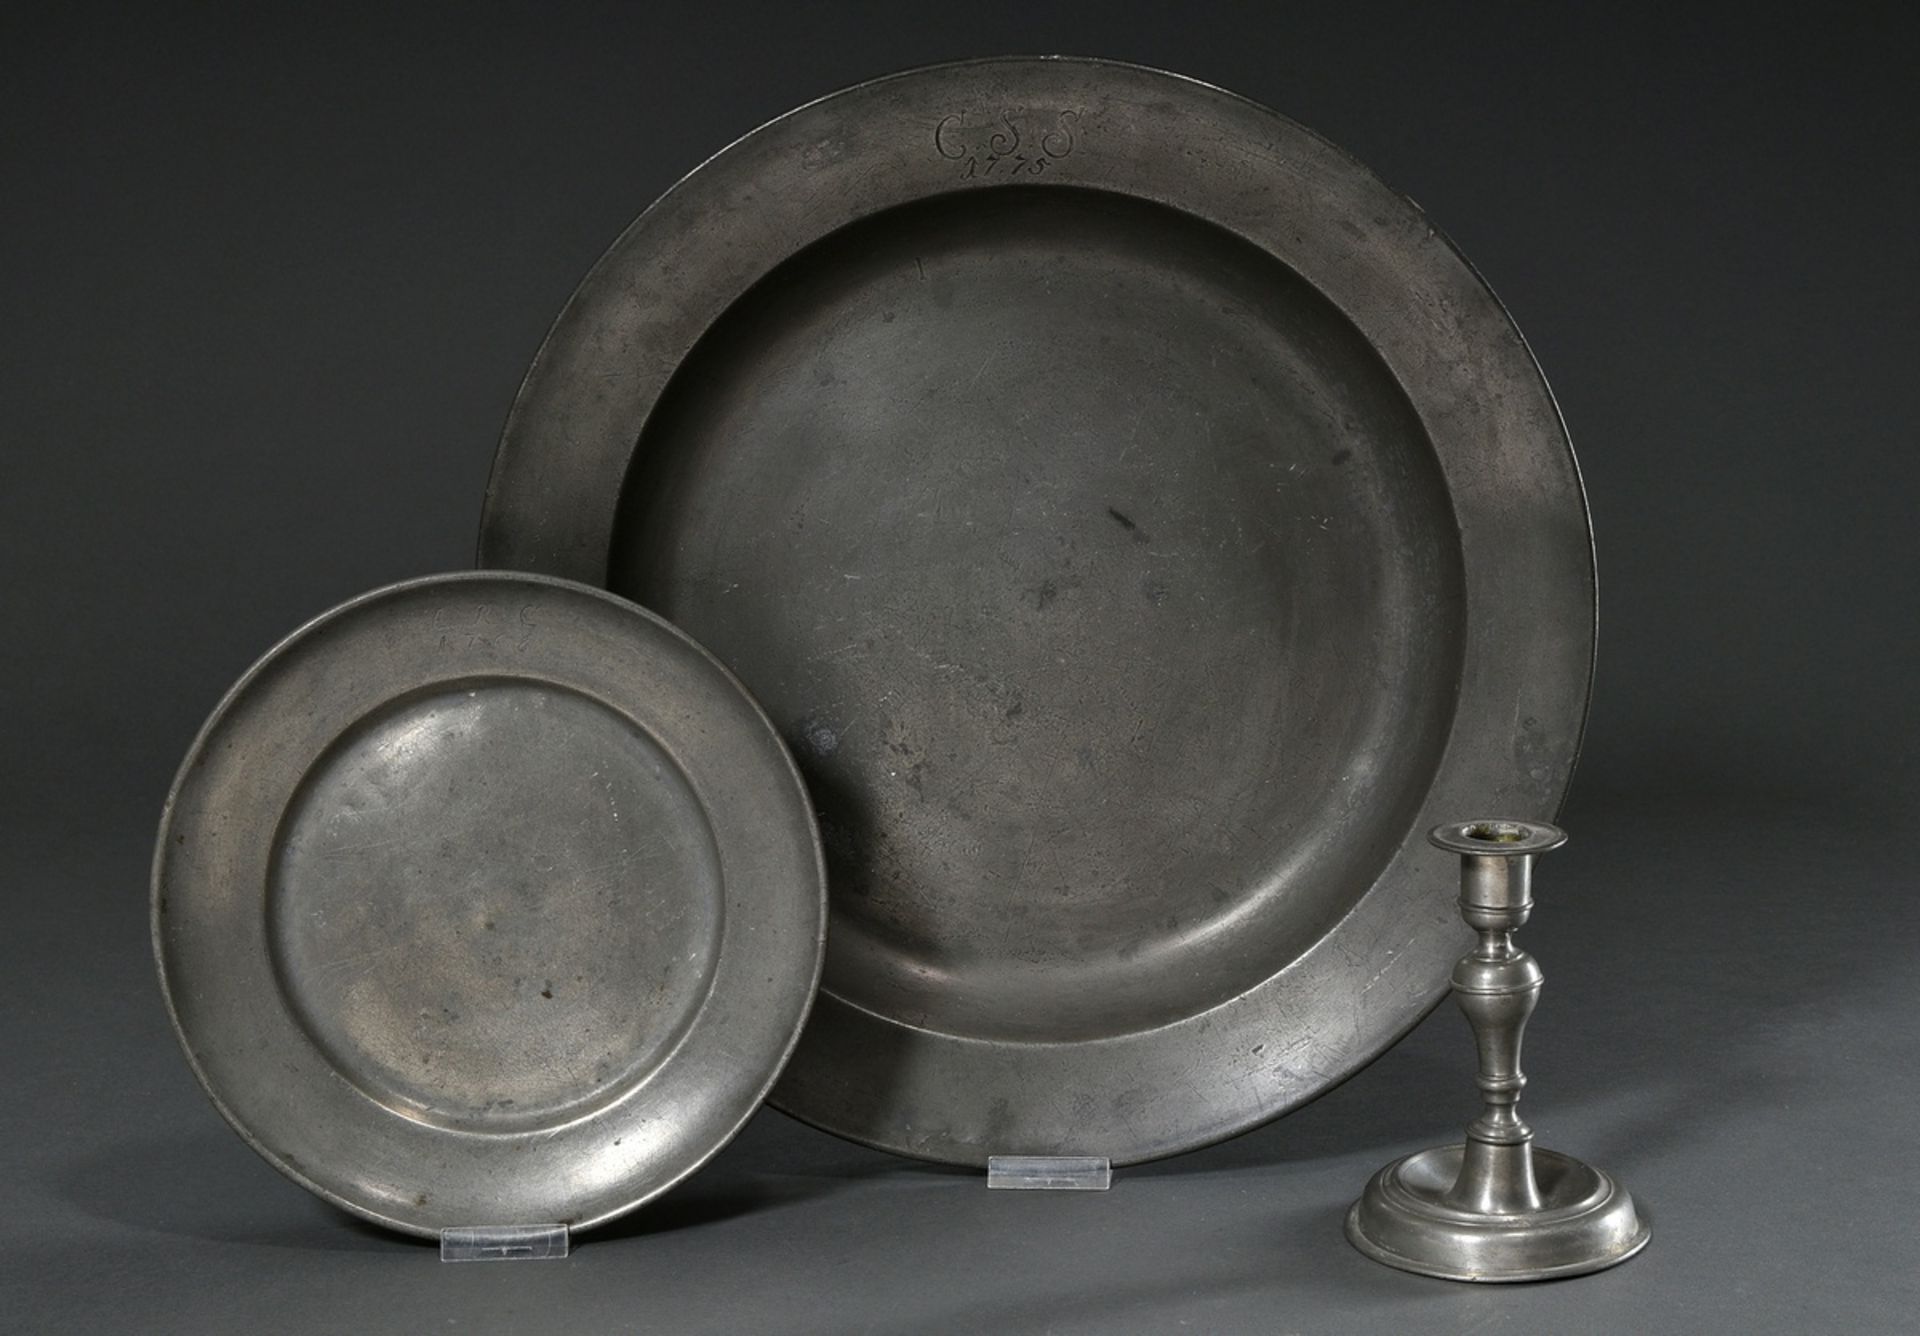 3 Various pieces of pewter, 18th century: large plate with engraved owner's monogram "C.S.S. 1775",